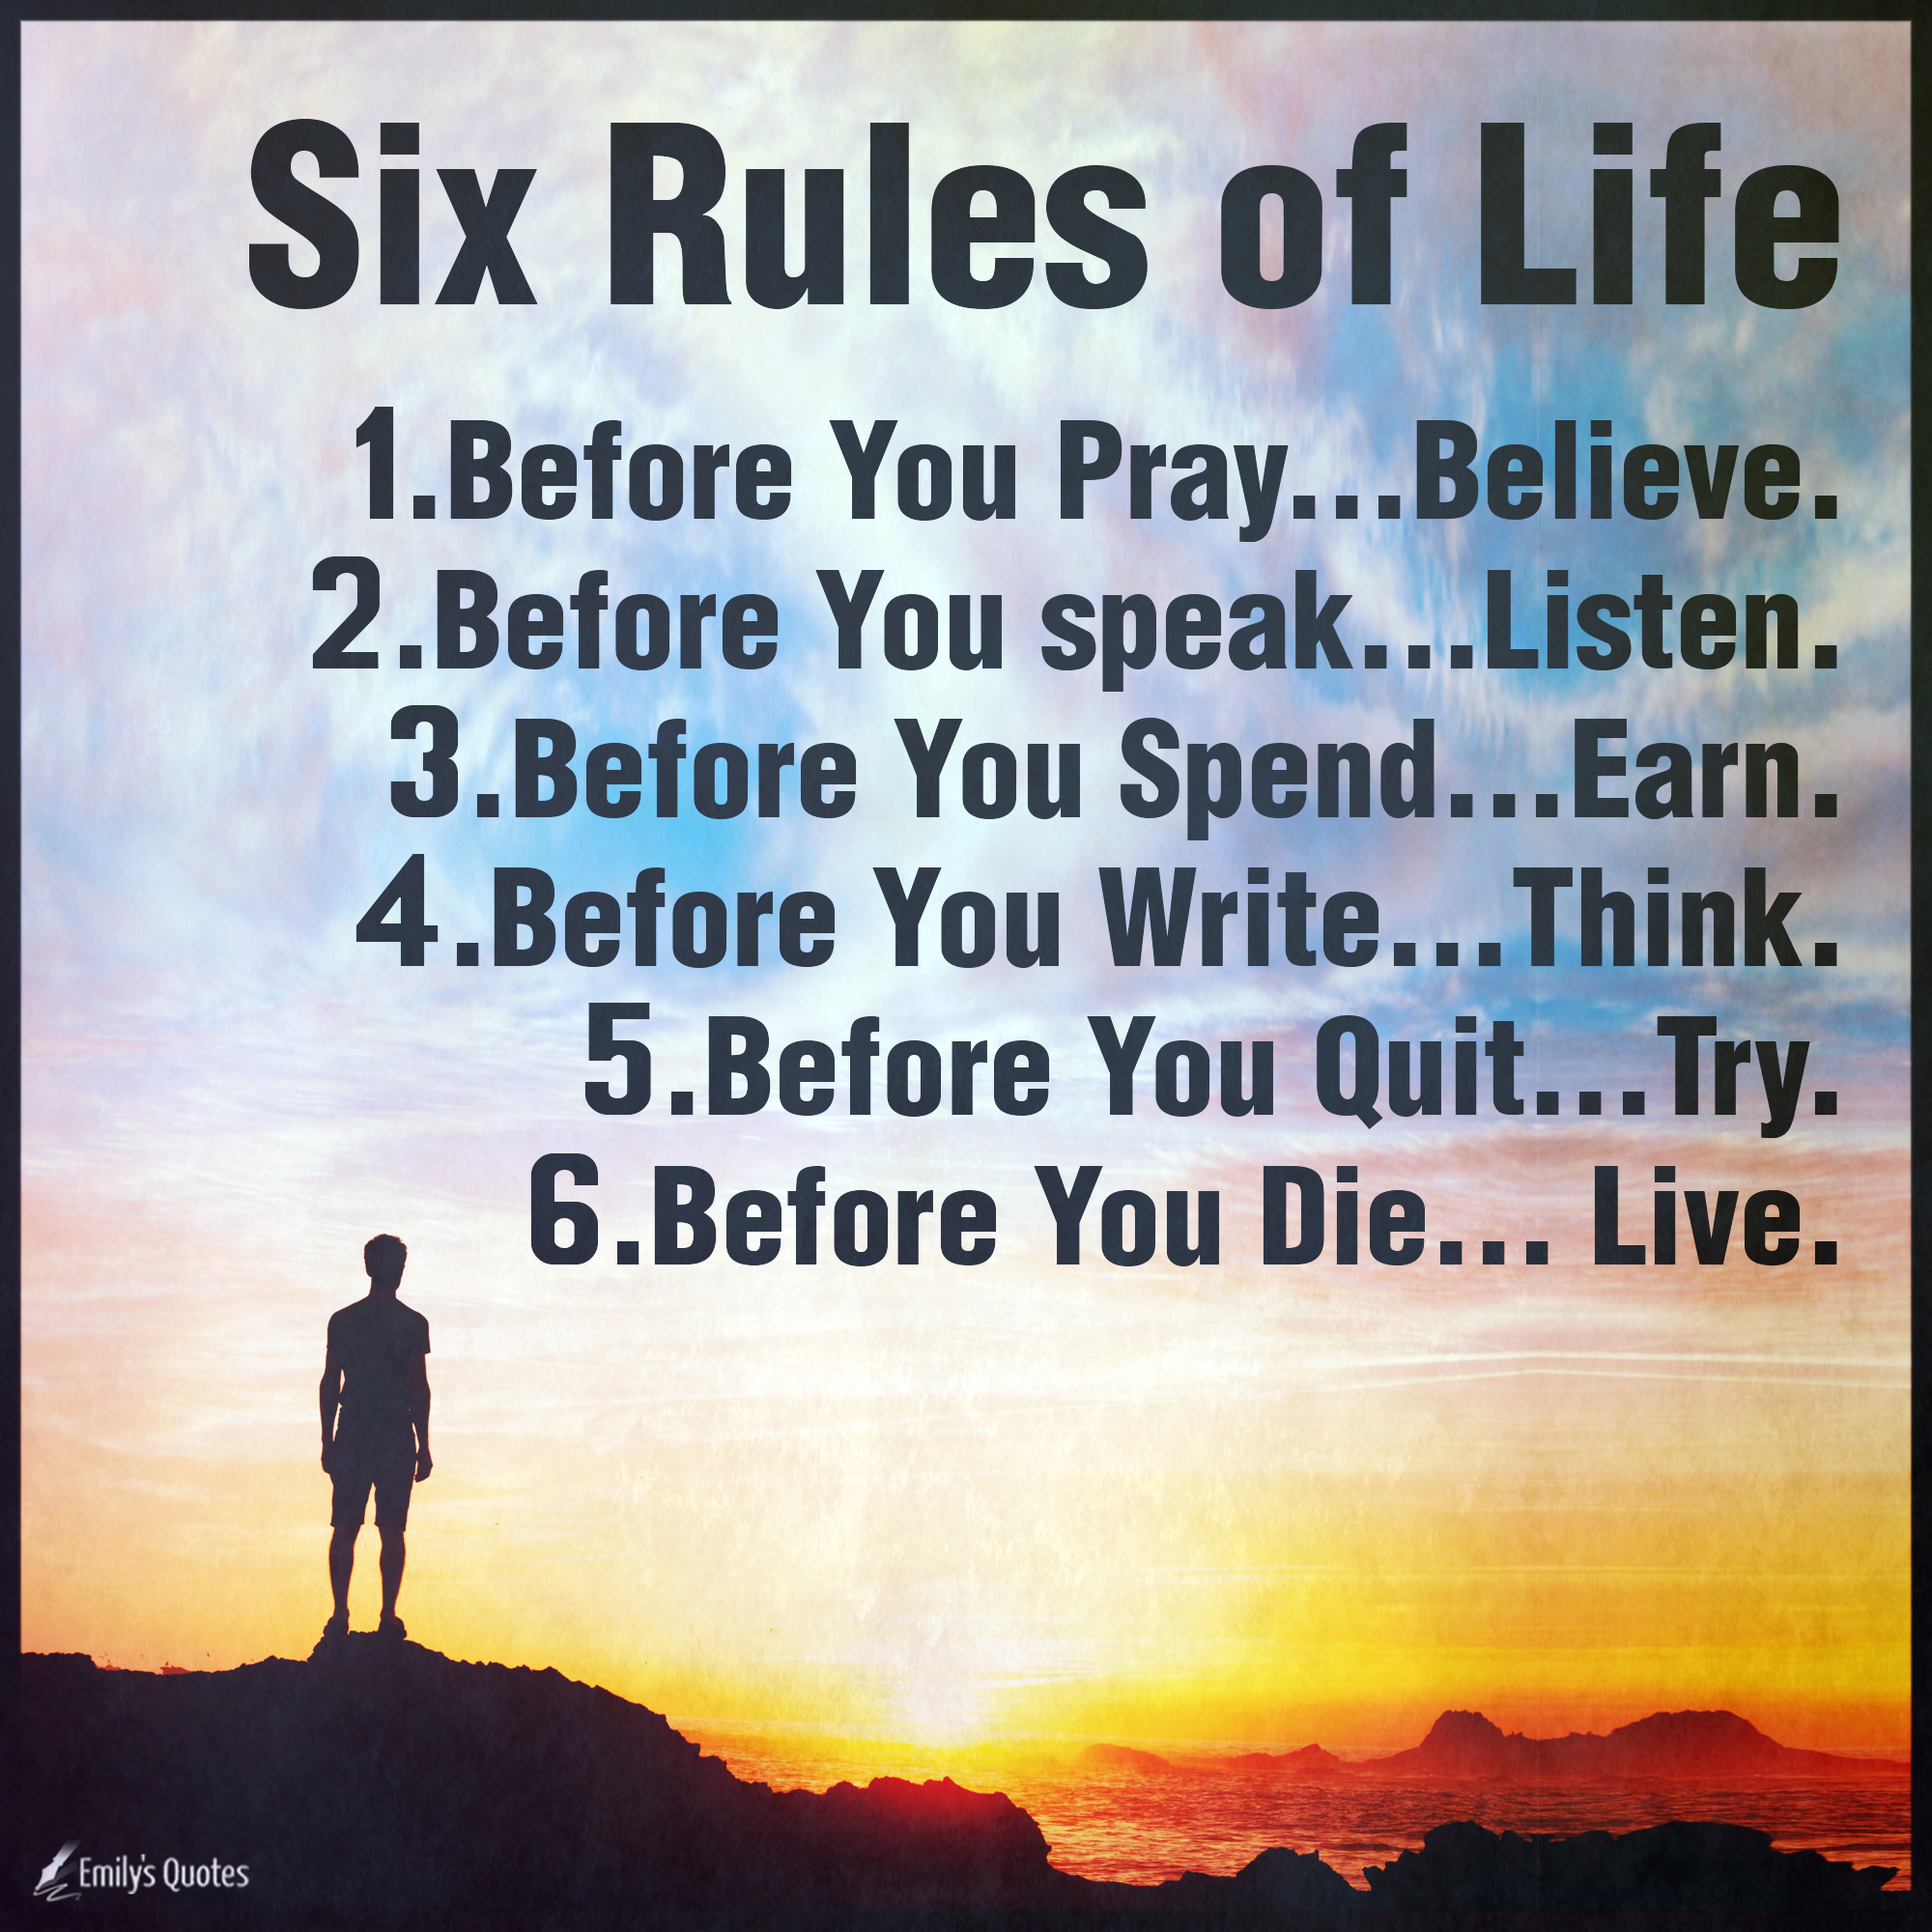 six-rules-of-life-popular-inspirational-quotes-at-emilysquotes